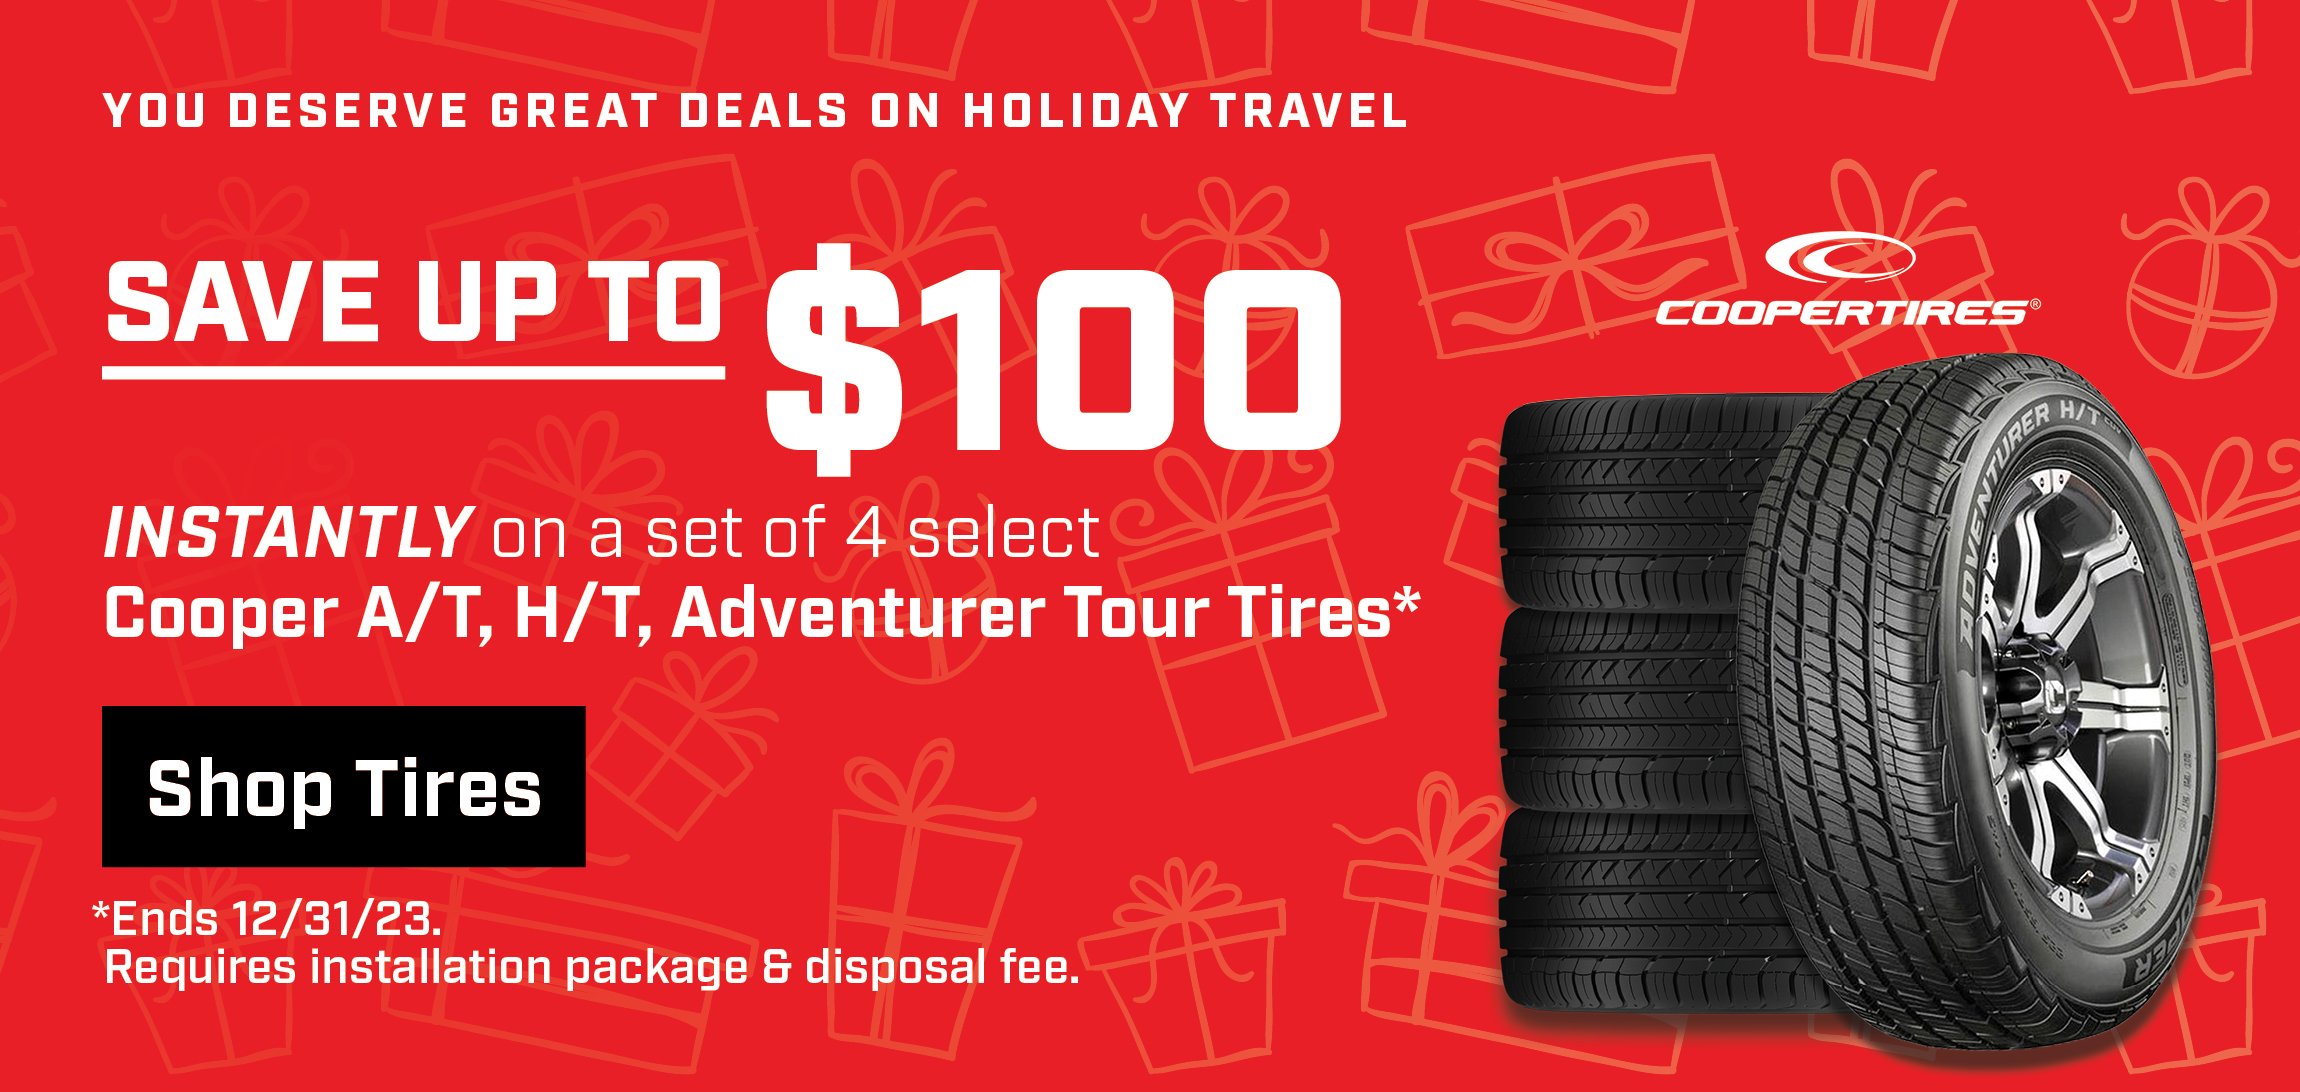 Save on Cooper Tires